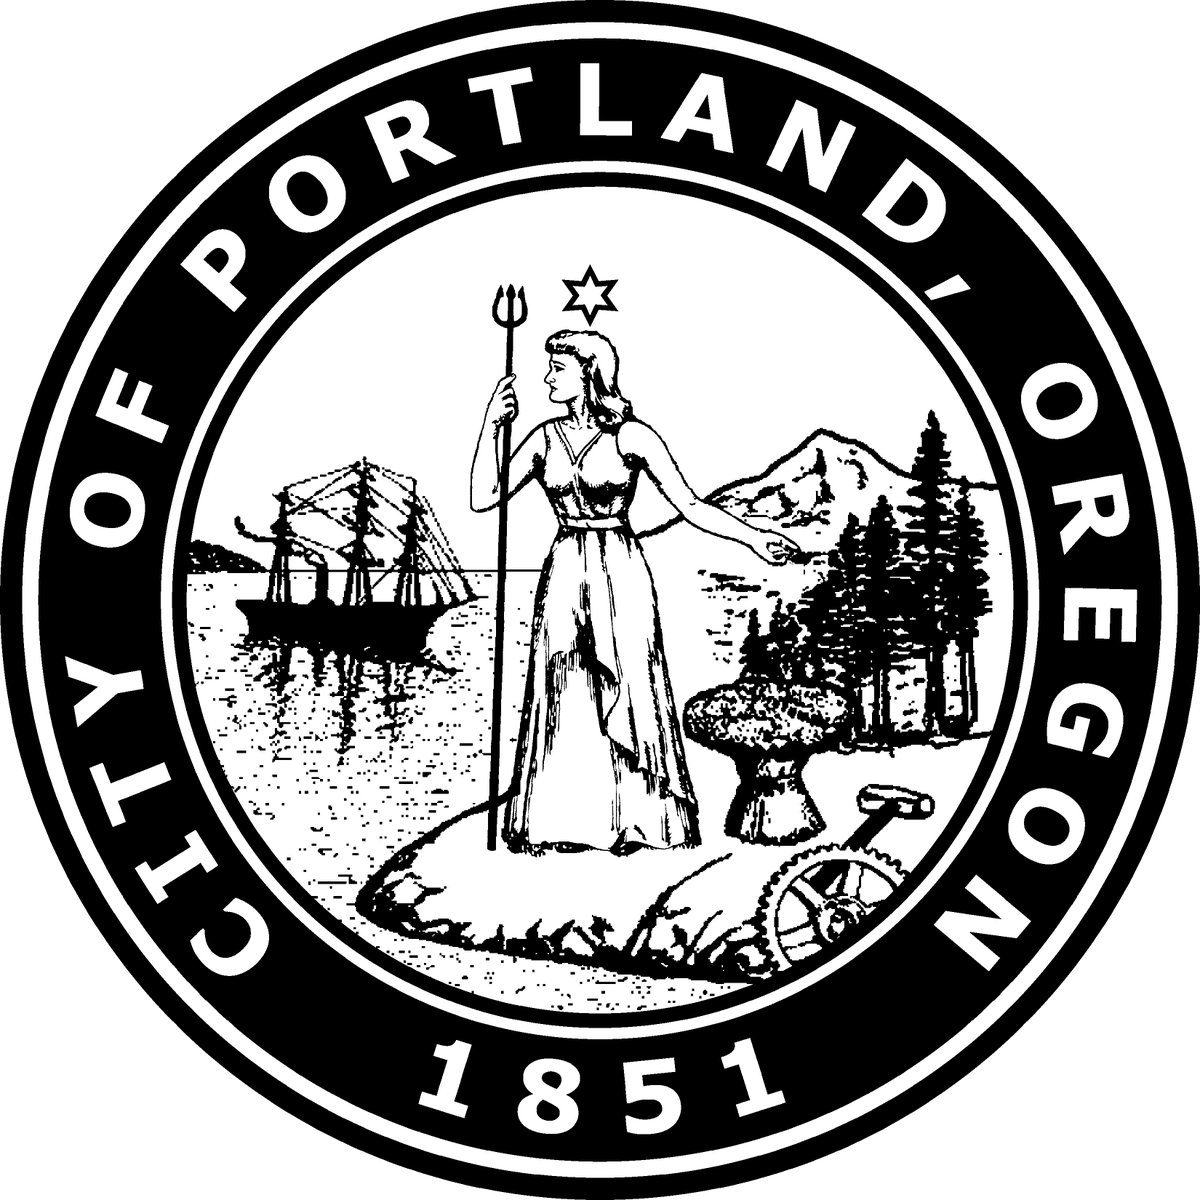 Join the team at the @PortlandGov! The City seeks an Equity and Inclusion Manager to champion diversity, accessibility, and inclusion. Apply now to make a difference. #PDXJobs #ORJobs ow.ly/xmIq50RsMYV